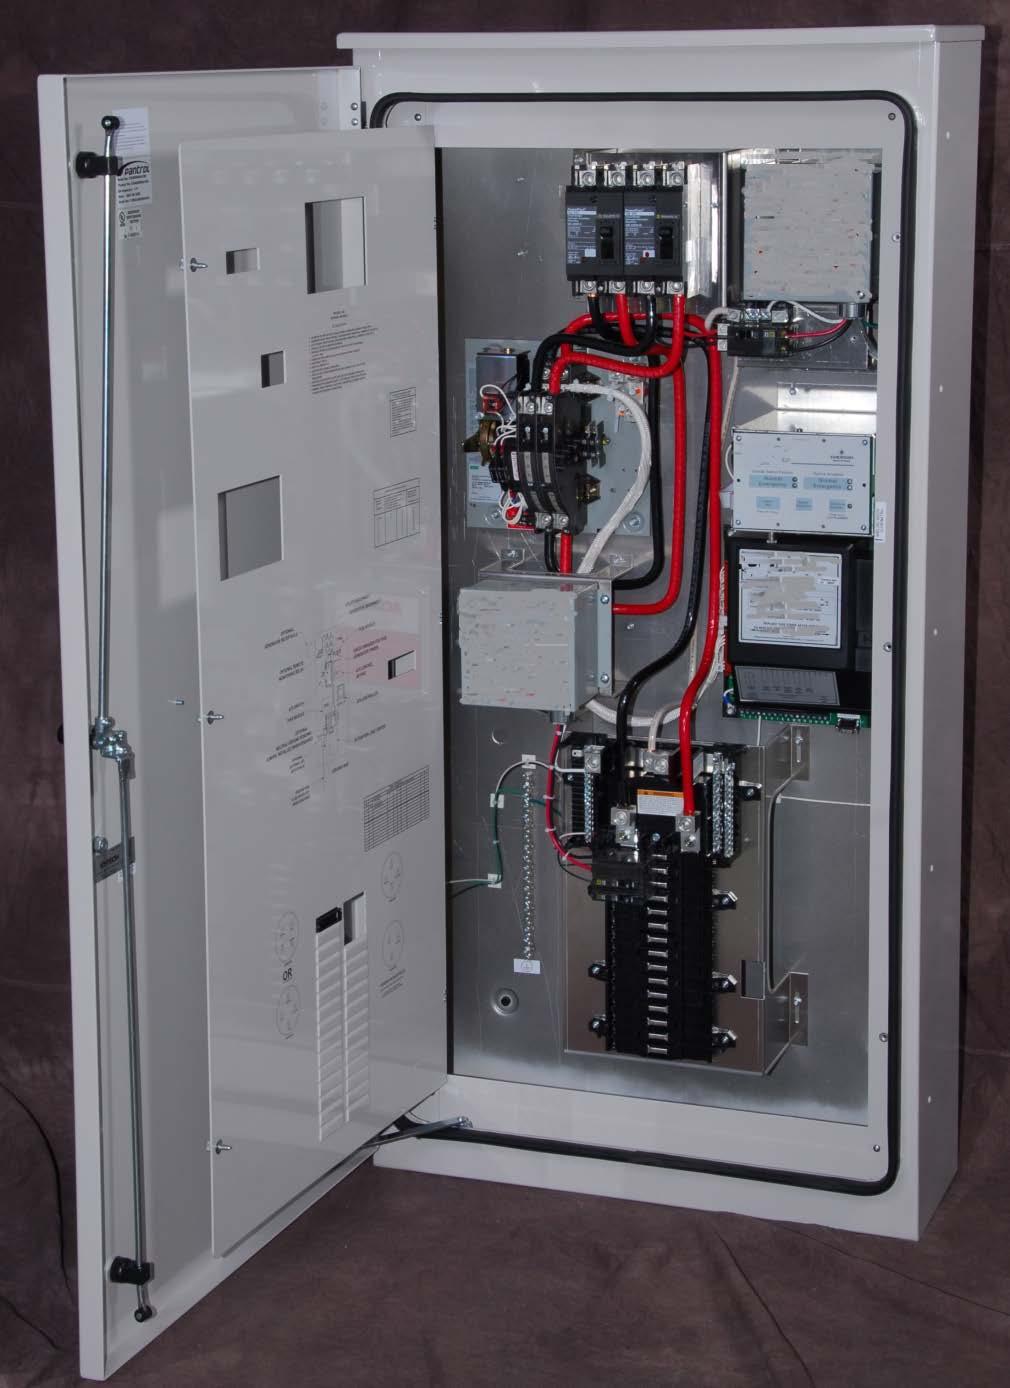 Power Transfer Cabinet 60h X 29w X 10d Type 3R Power Transfer Cabinet Features/Options UL 891 Dead Front Switchboard Listed Suitable for Use as Service Equipment N-G Bonding kit included Voltage: